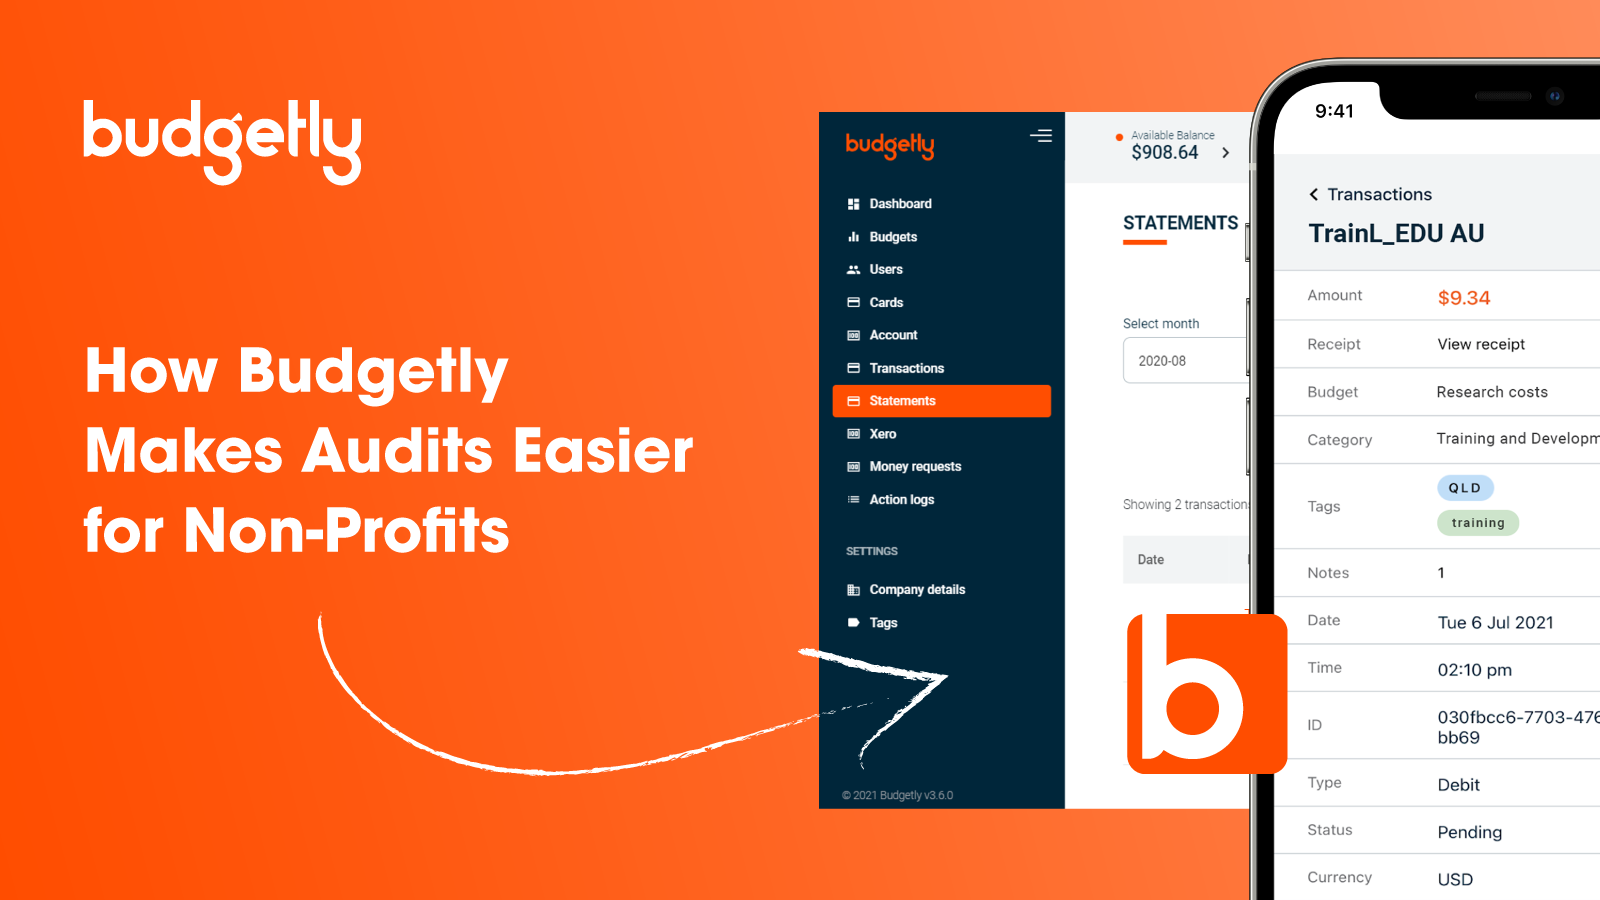 How Budgetly Makes Audits Easier for Non-Profits